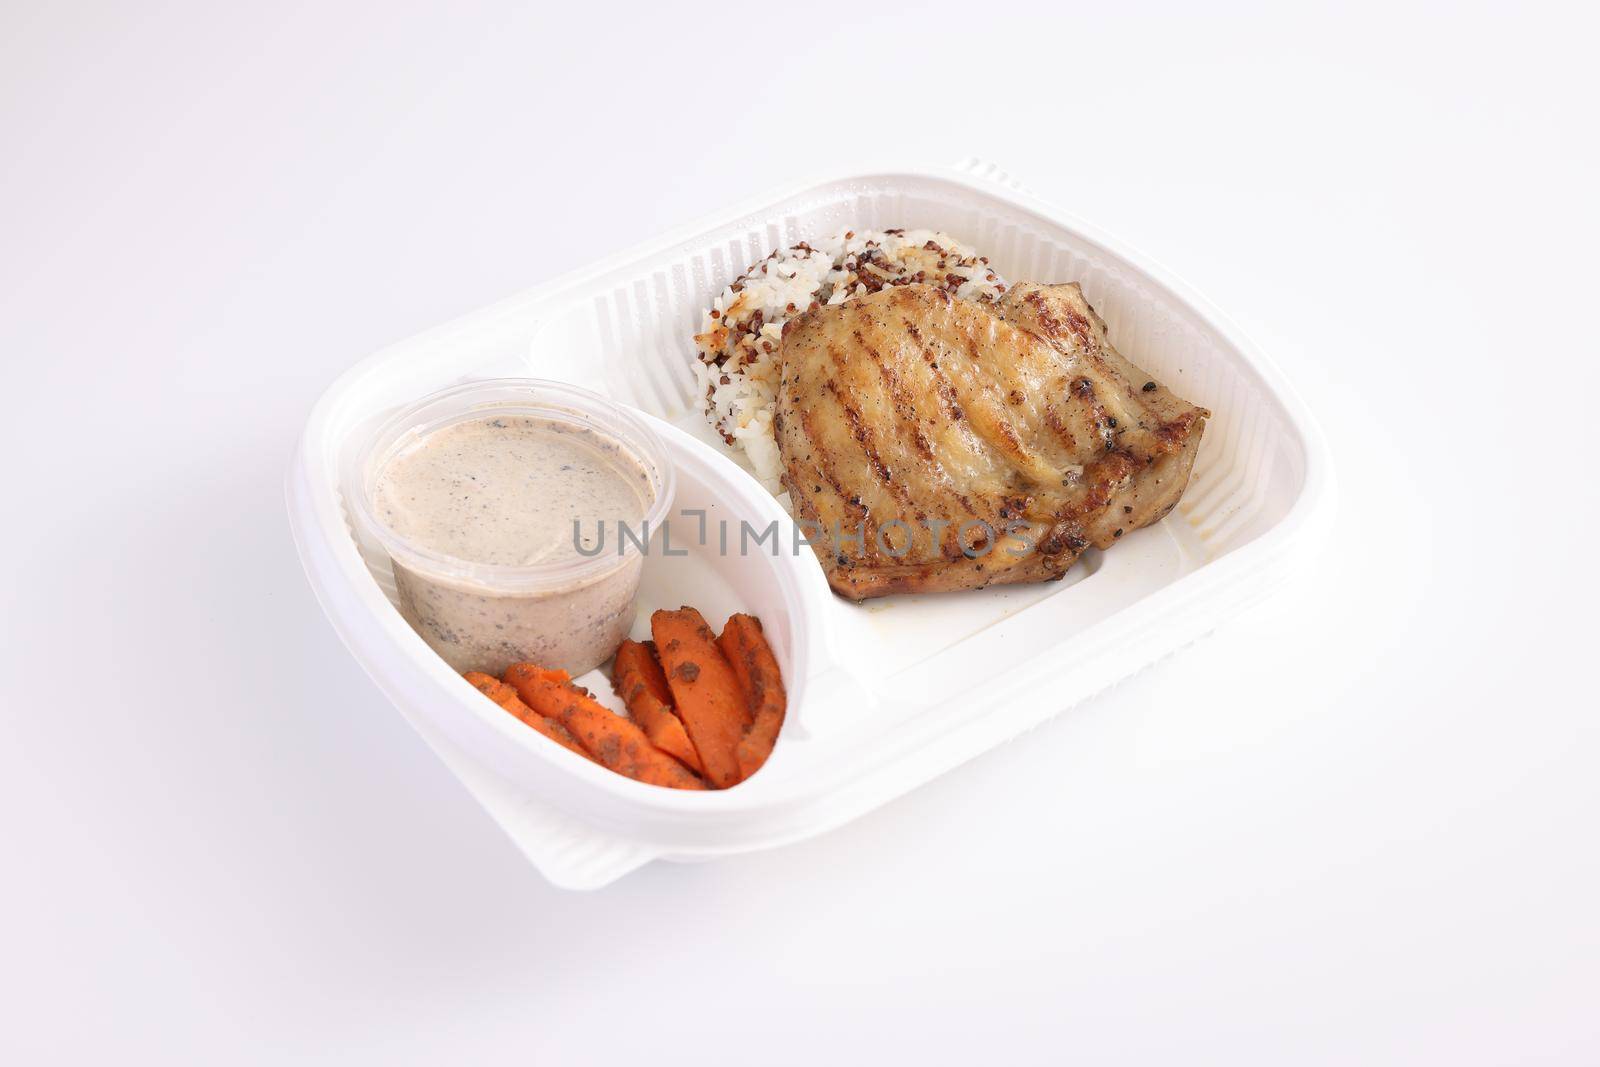 Grilled chicken with rice with delivery take home package isolated in white background by piyato